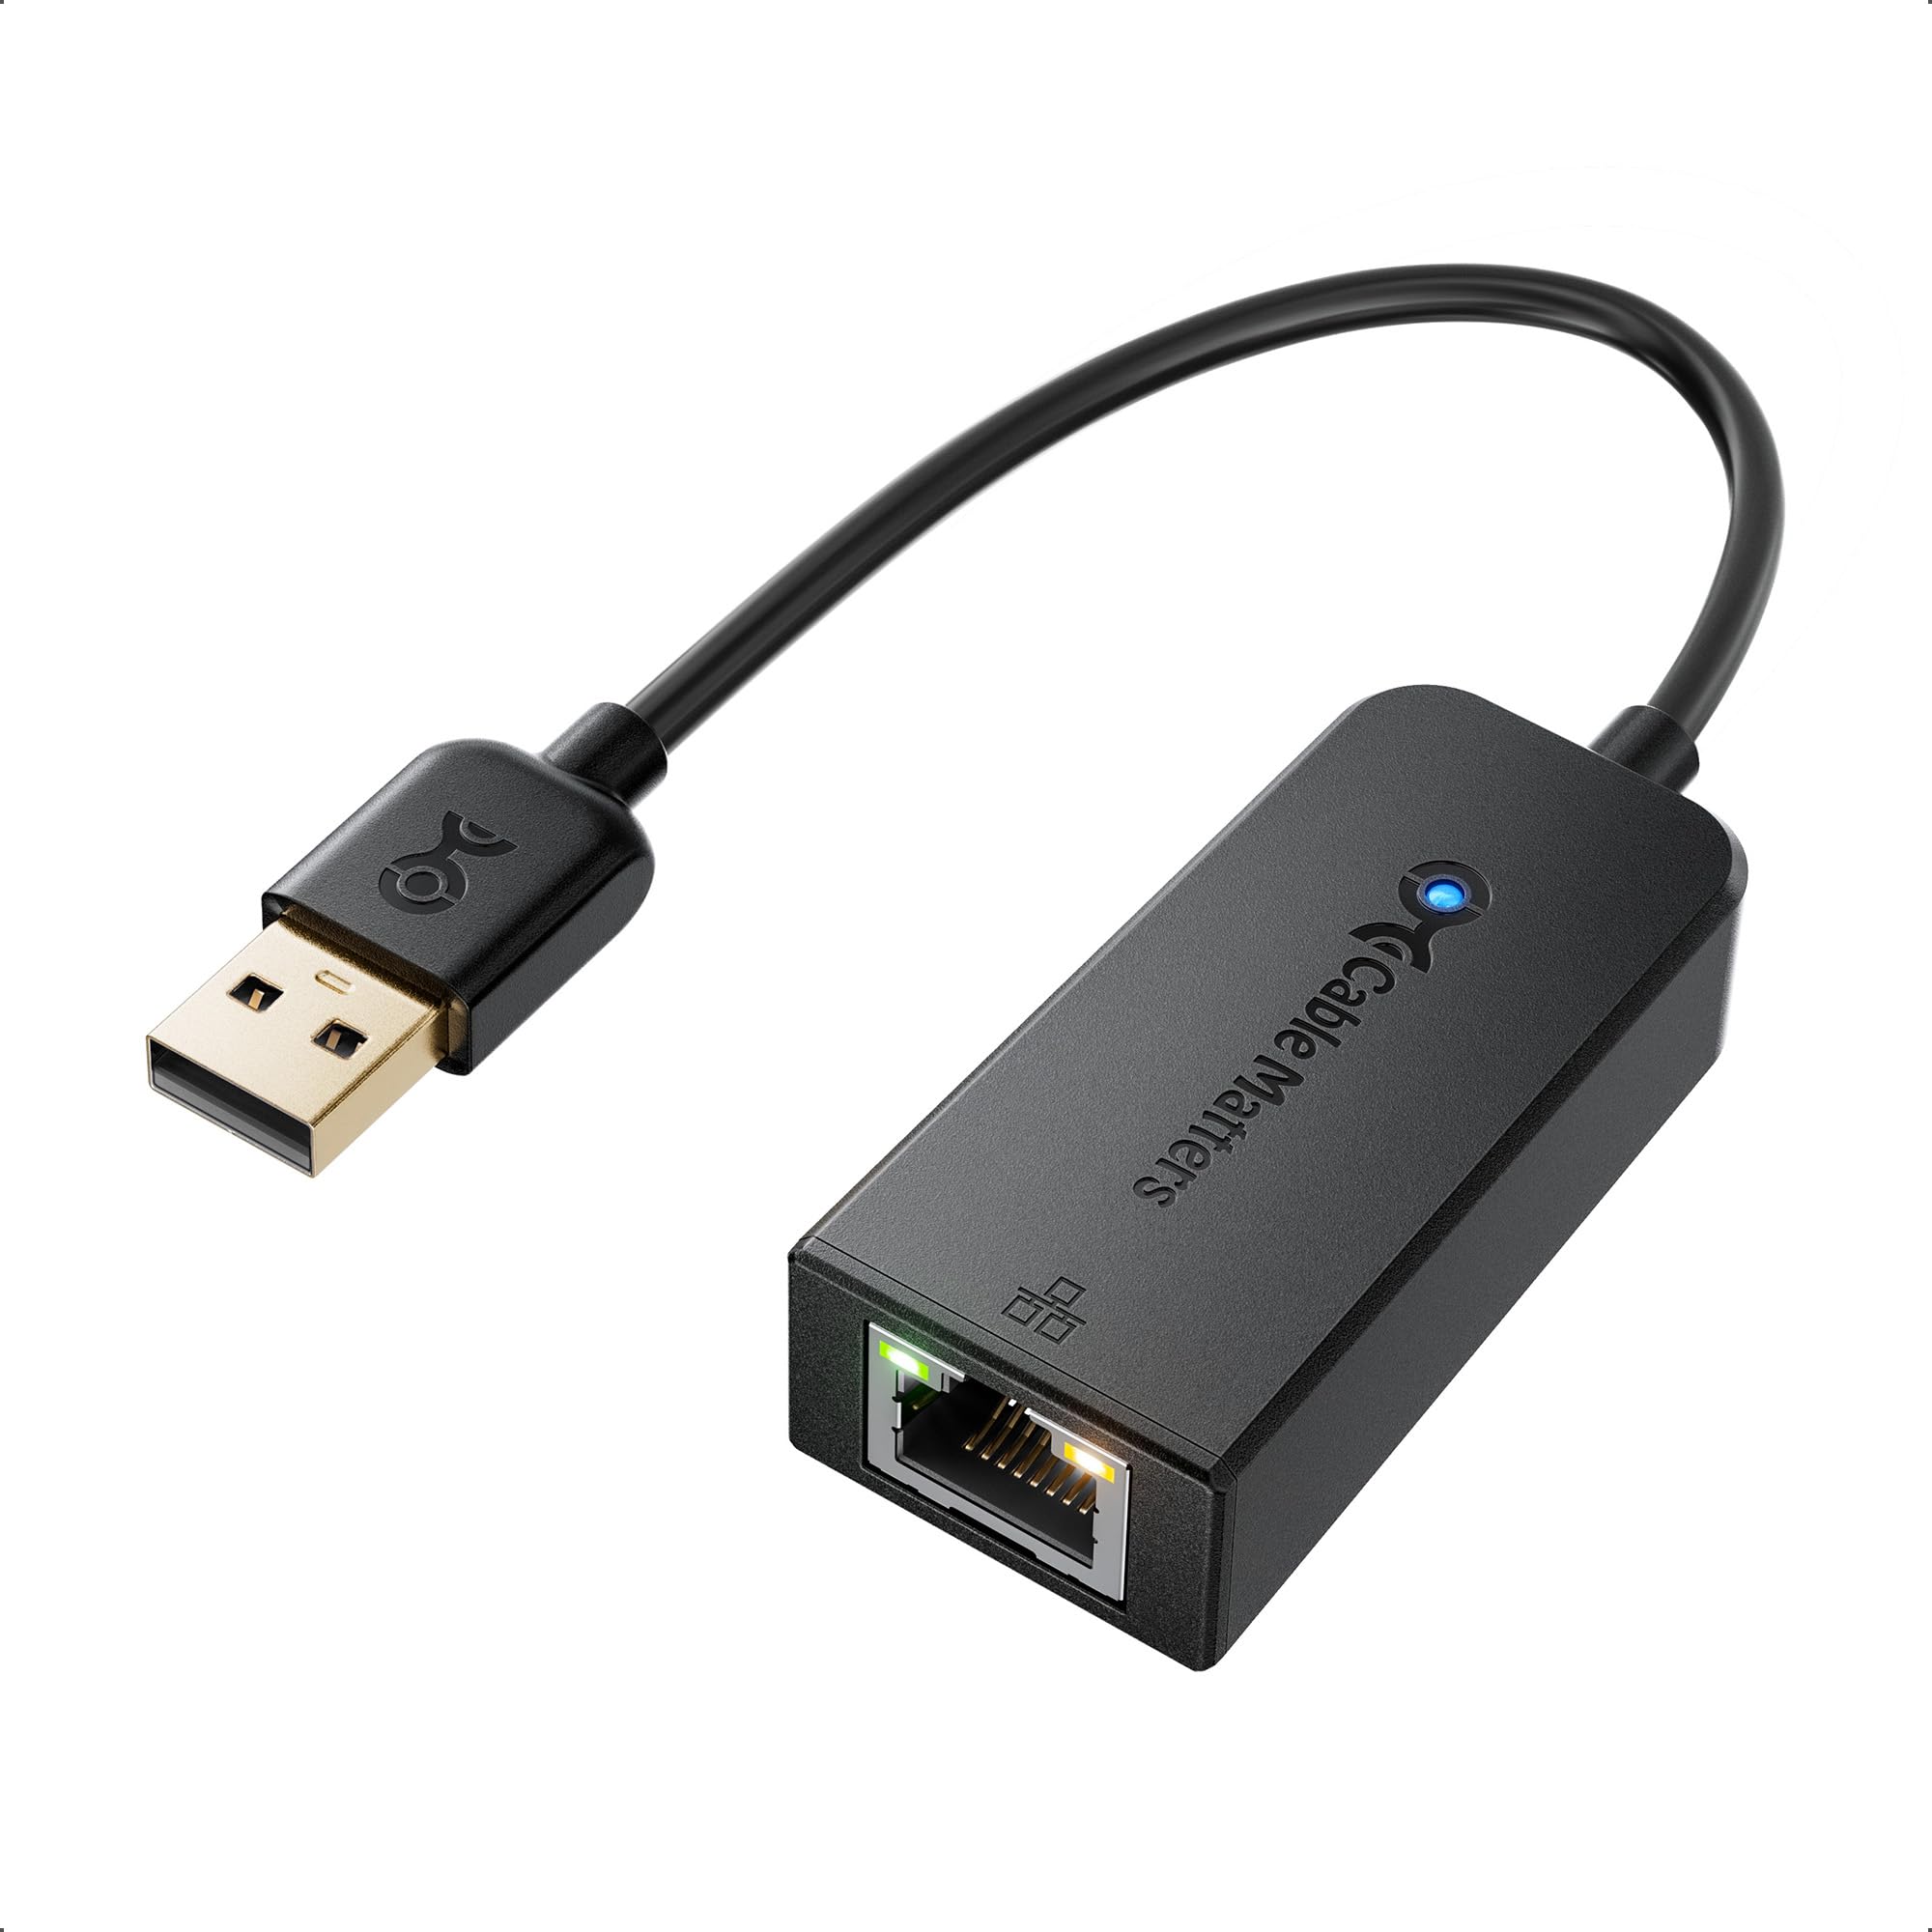 Network adapter and Ethernet cable connection